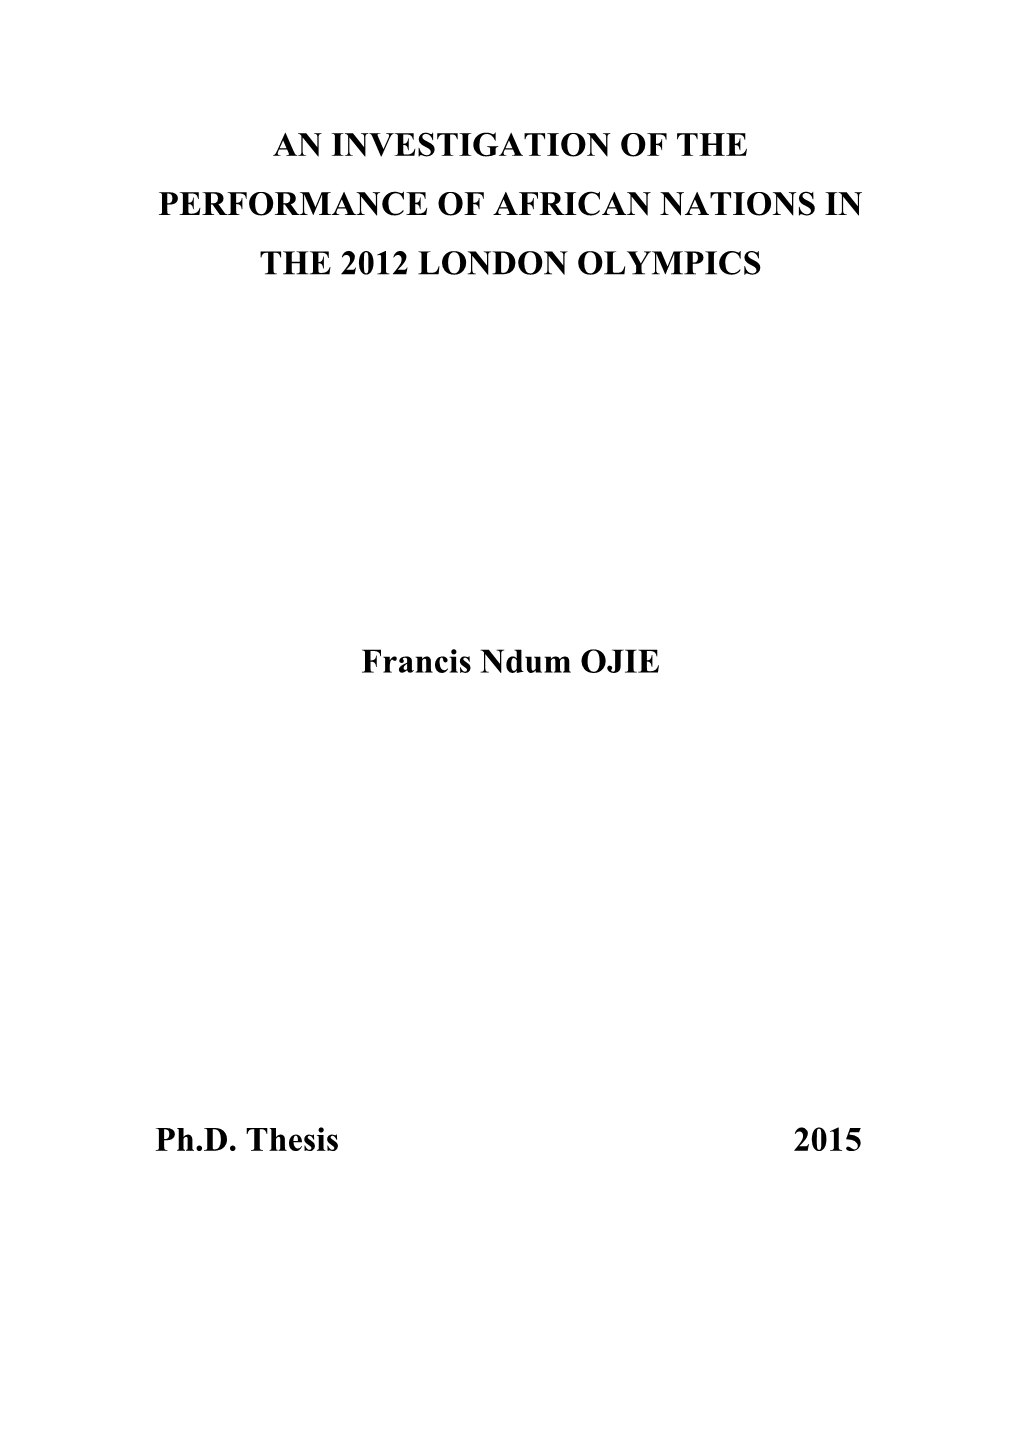 AN INVESTIGATION of the PERFORMANCE of AFRICAN NATIONS in the 2012 LONDON OLYMPICS Francis Ndum OJIE Ph.D. Thesis 2015